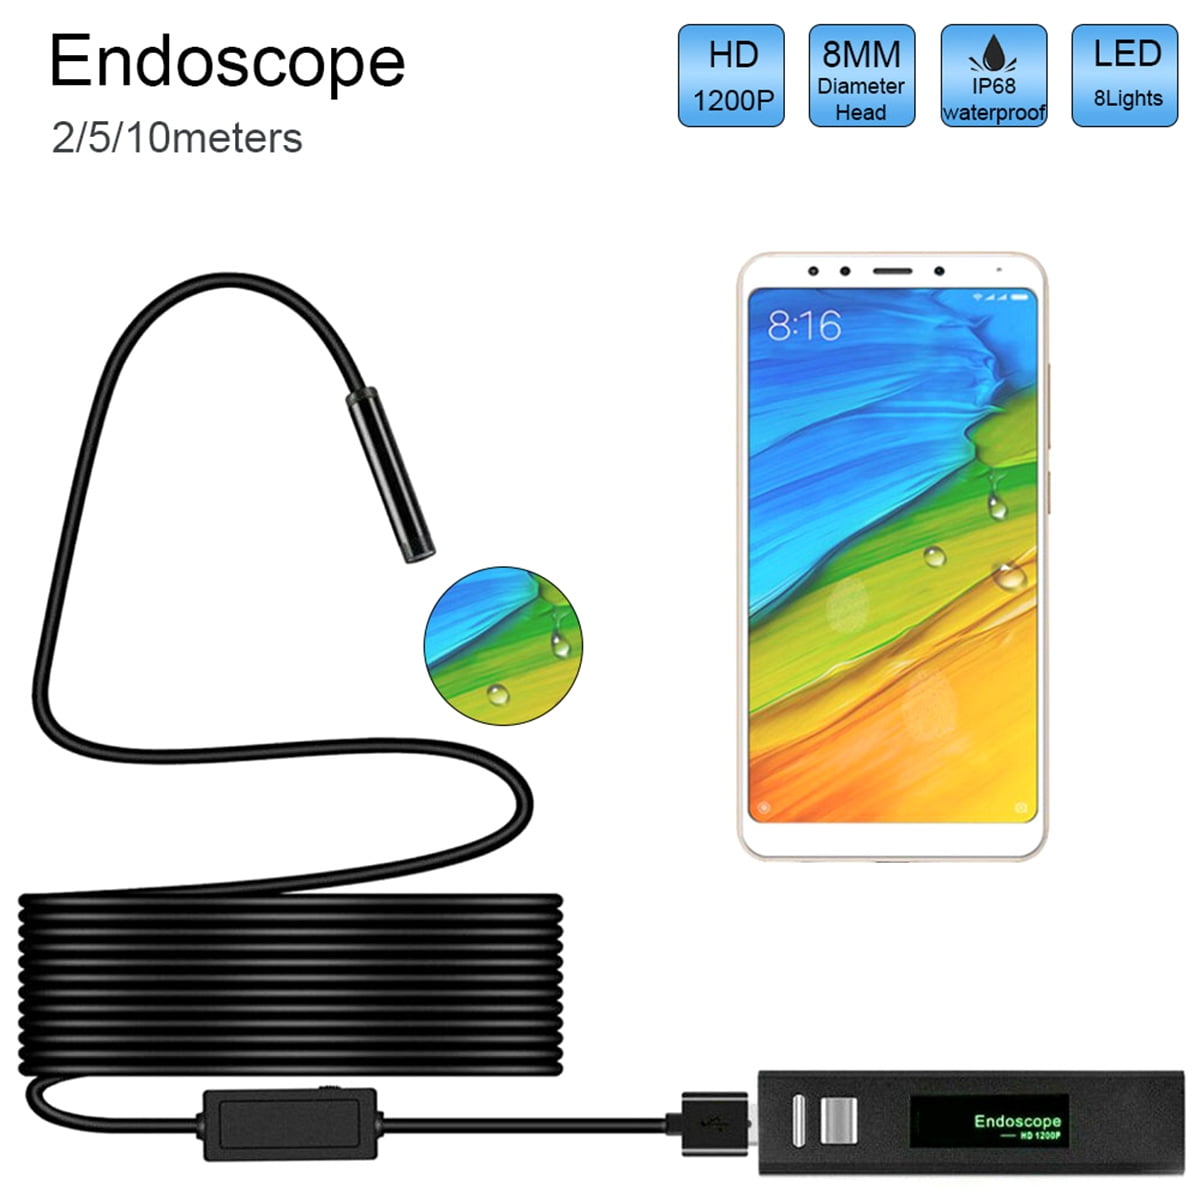 Samsung Wireless Endoscope Camera,IP67 Waterproof WiFi Borescope Inspection 2.0MP HD Flexible Snake Camera for Android iOS Smartphone Tablet-3.5m/11.5FT iPhone 